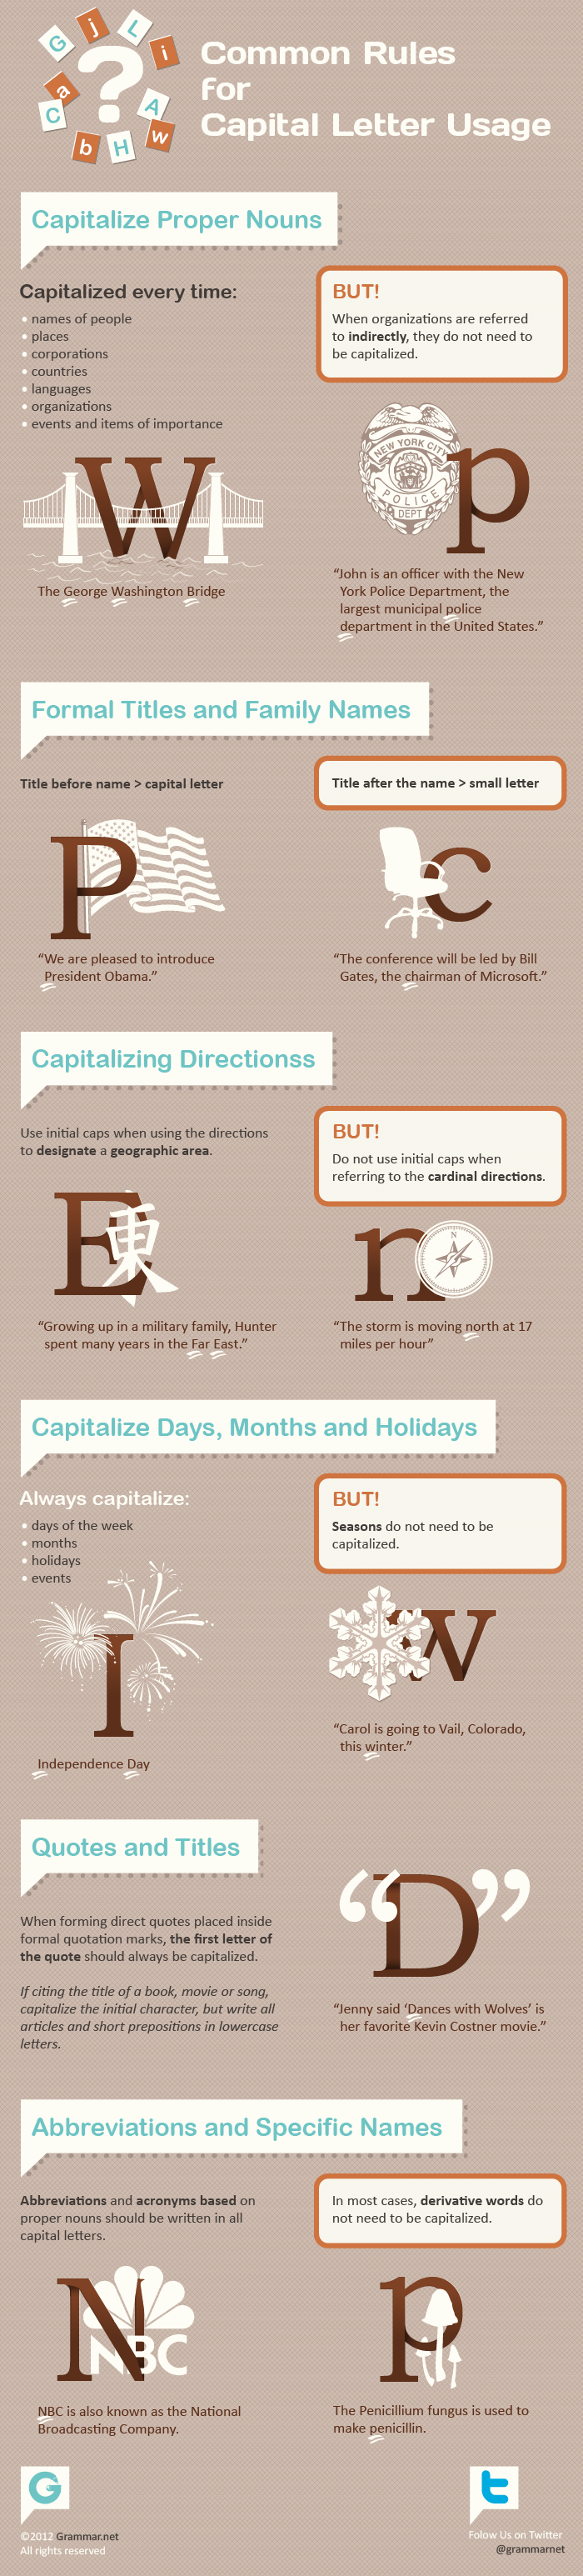 Common Rules for Capital Letter Usage